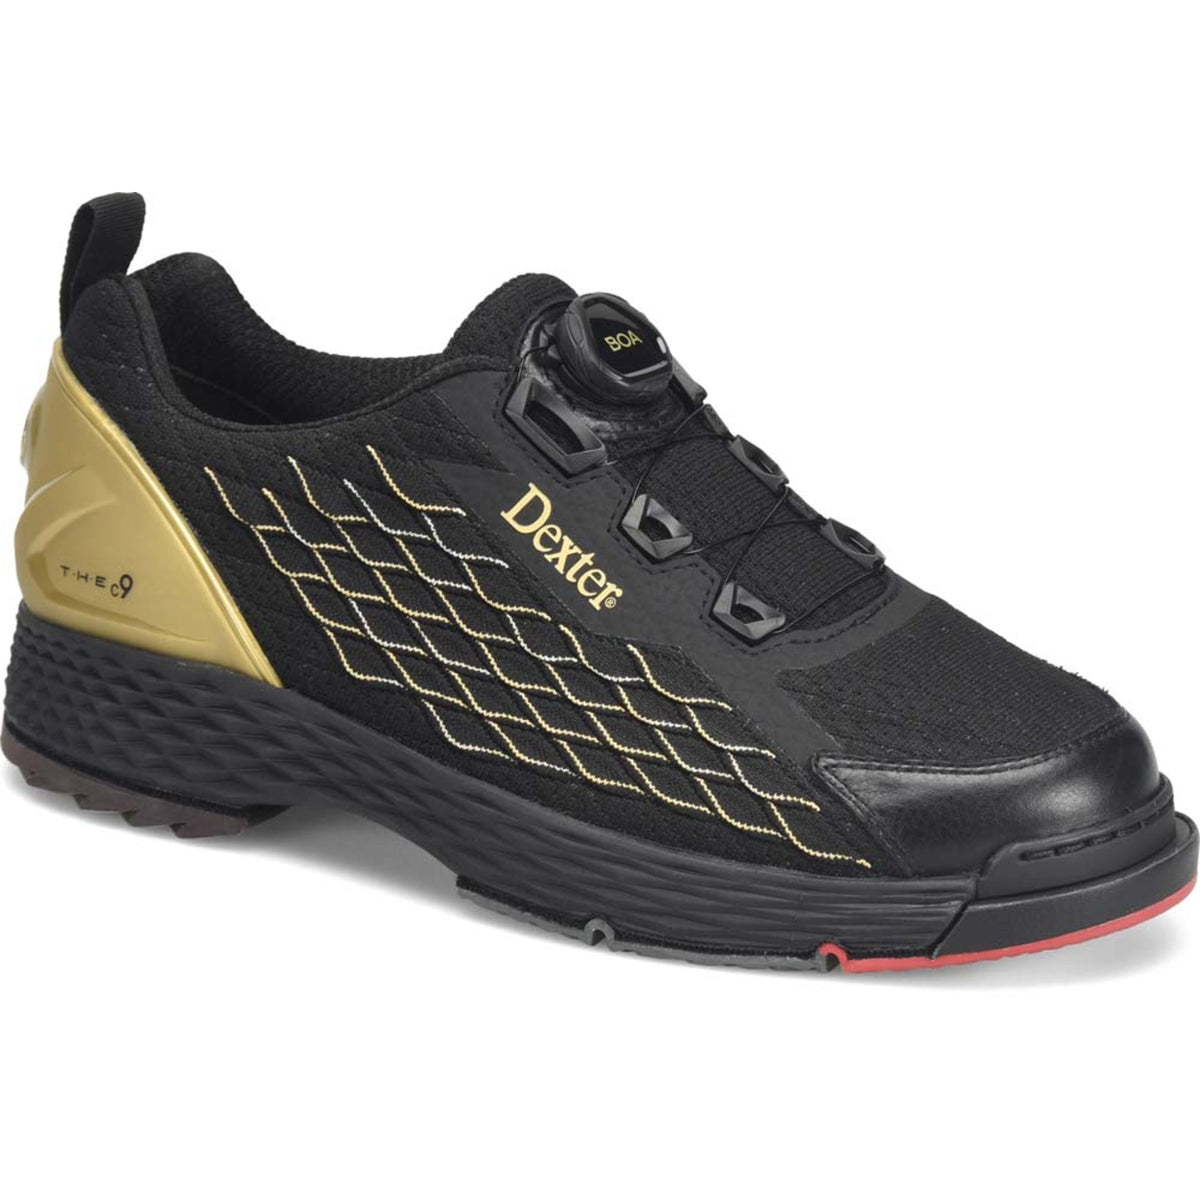 The C-9 Knit Boa Black/ Gold Wide Shoes